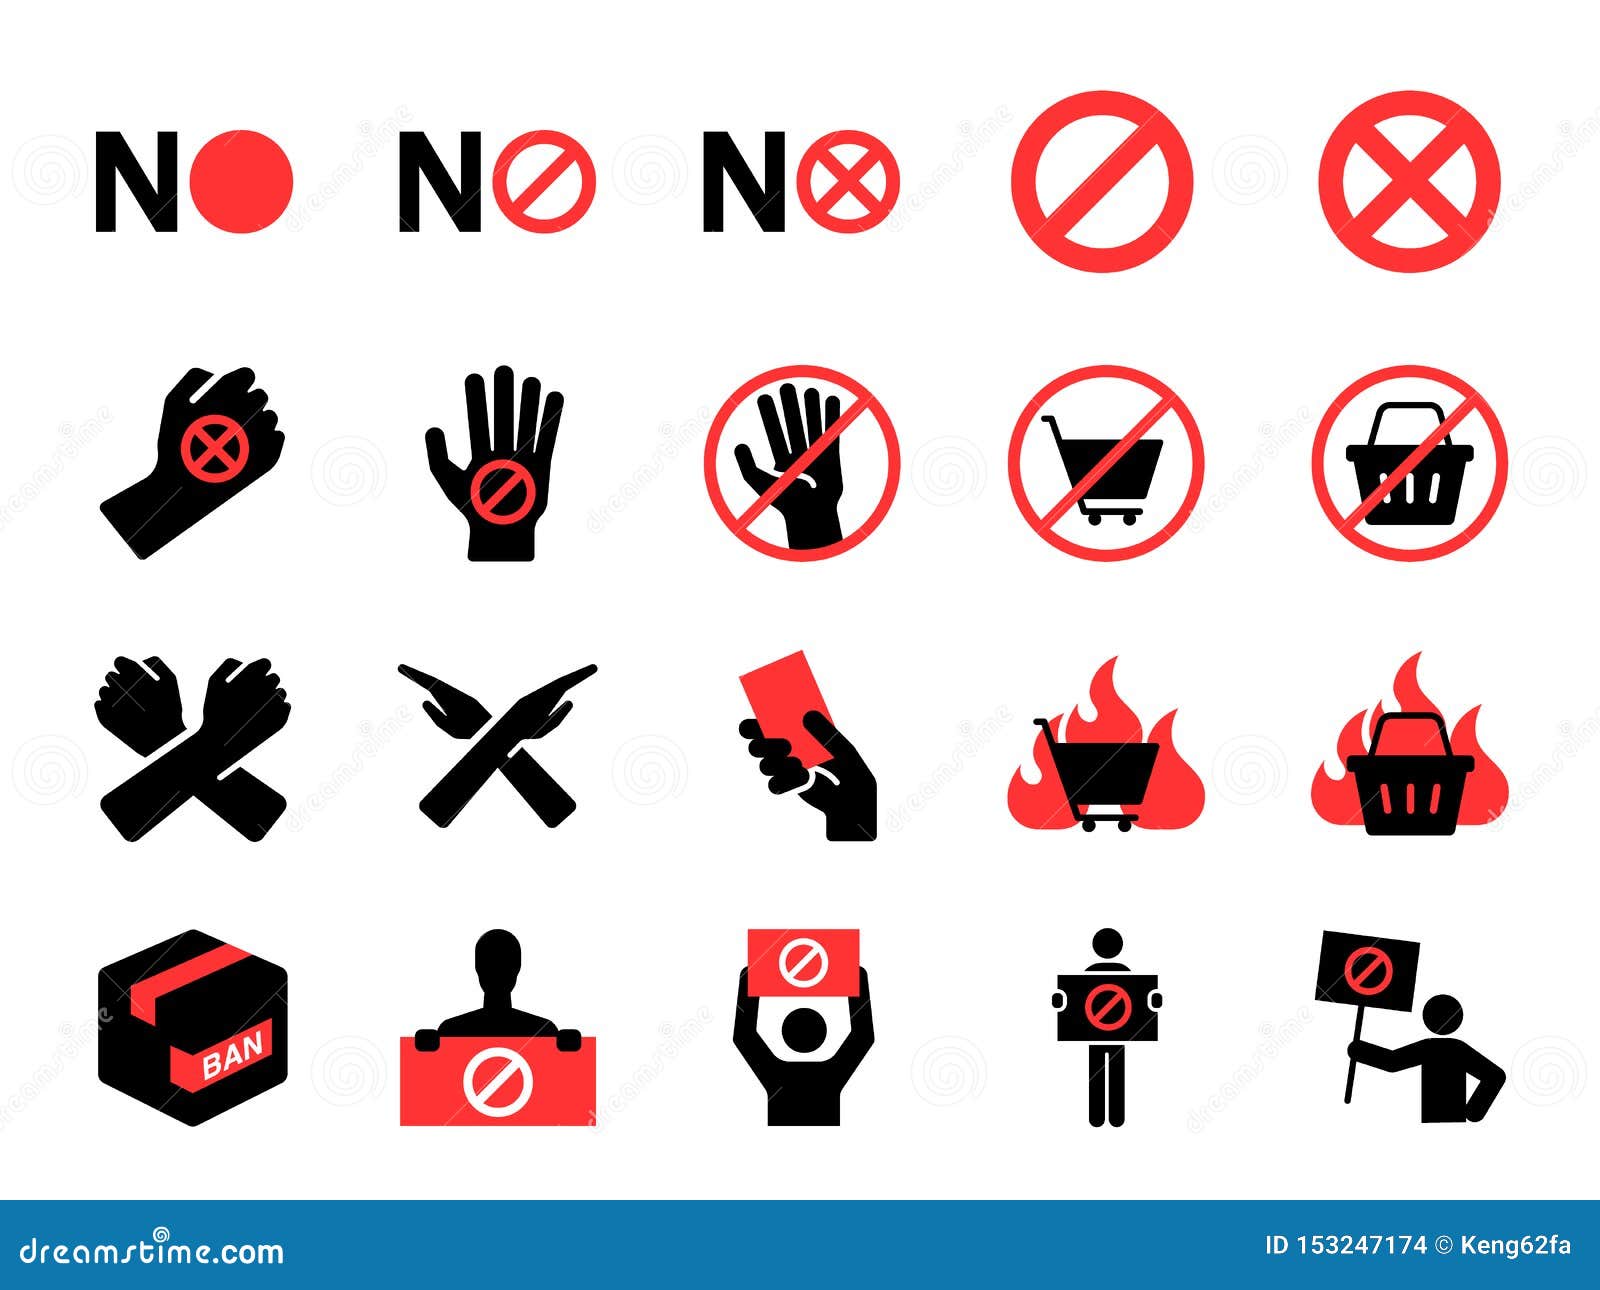 boycott icon set. included icons as protest, ban, no, reject, protester, forbidden and more.